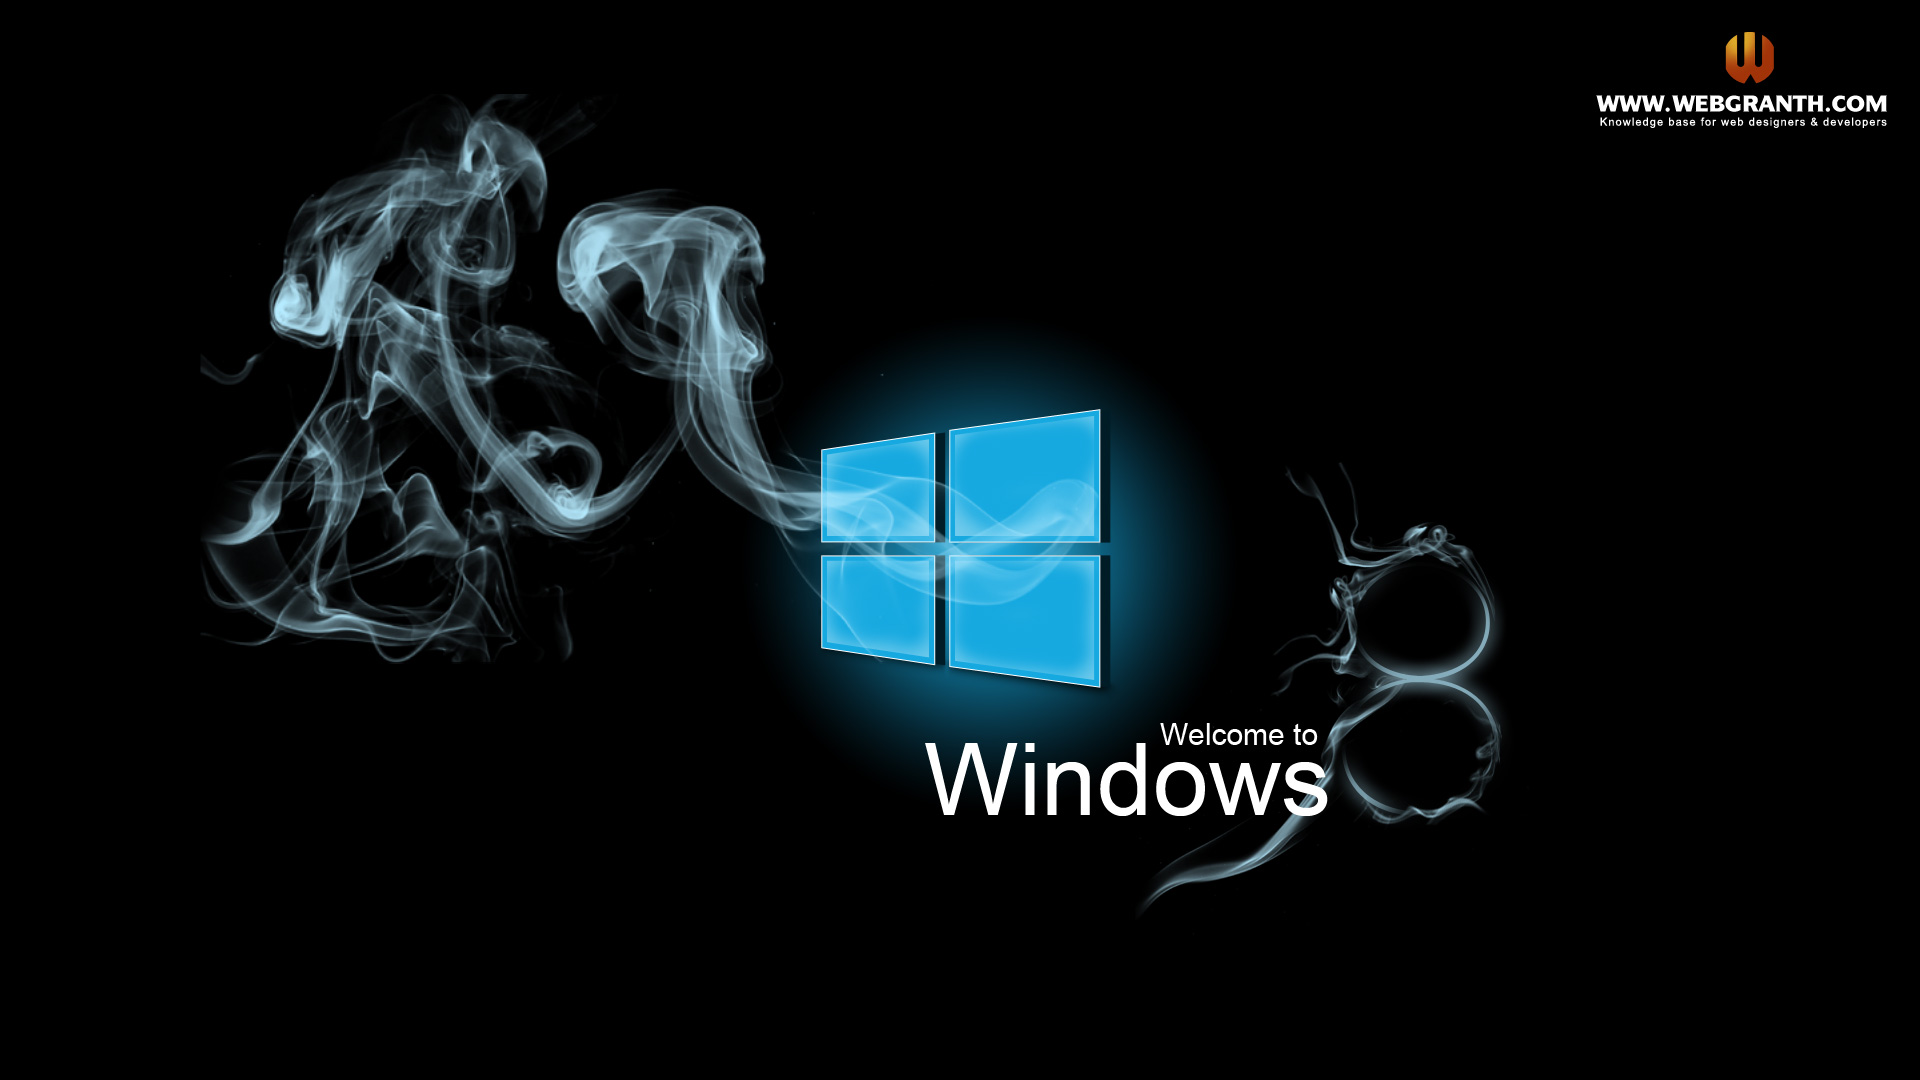 Windows Wallpaper Background HD Image Of